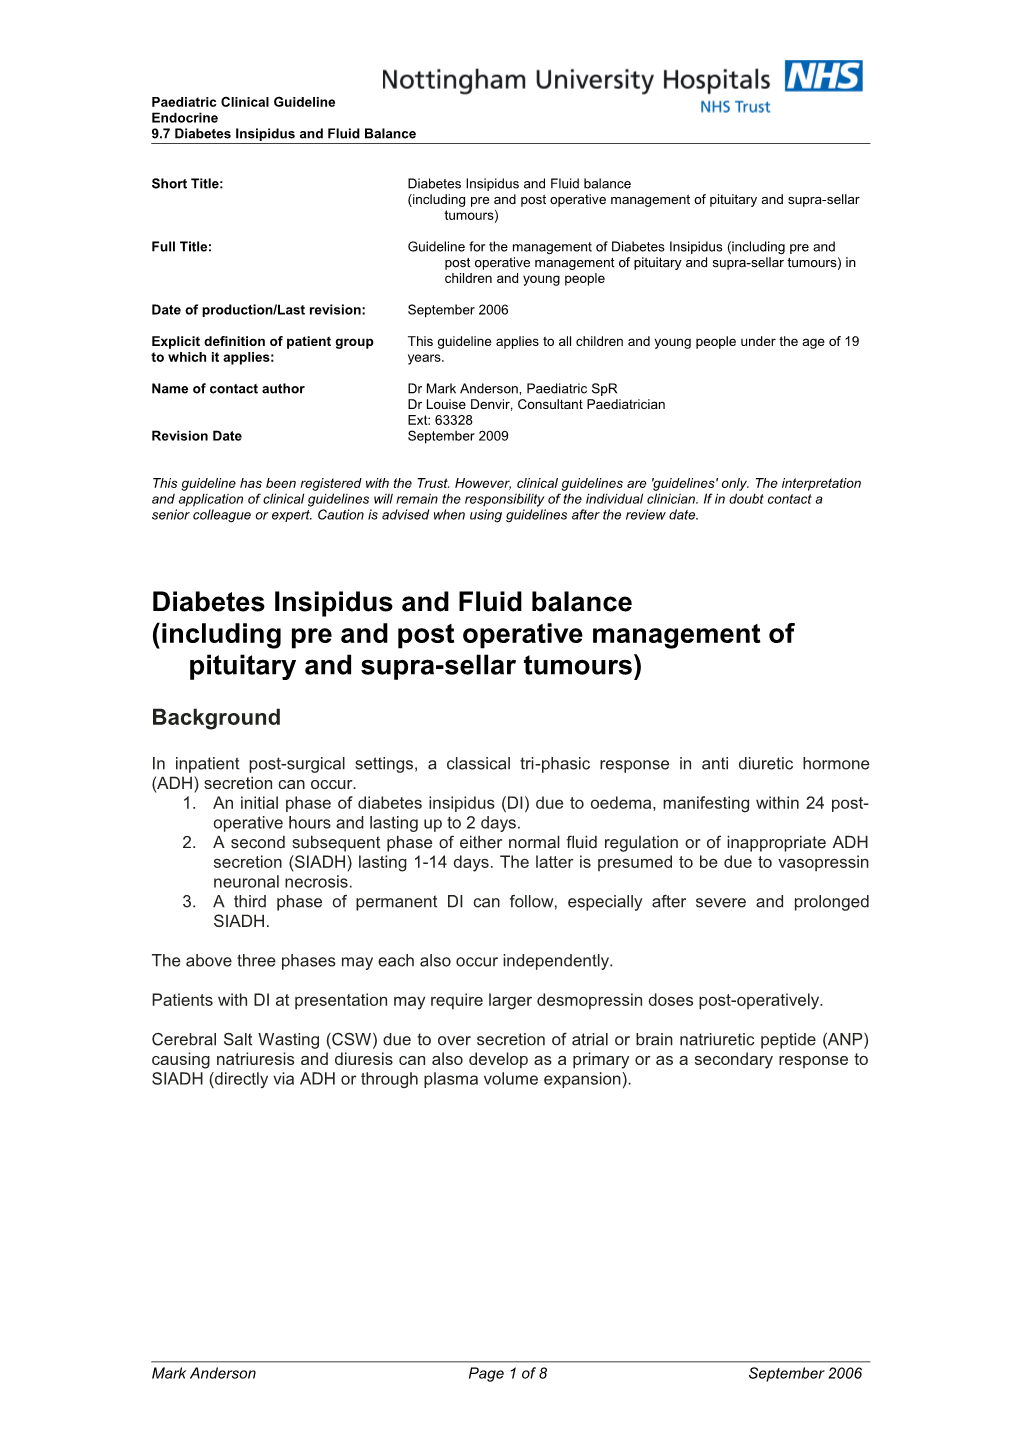 Post-Operative Fluid Management Guidelines and Nursing Charts for Management of Pituitary